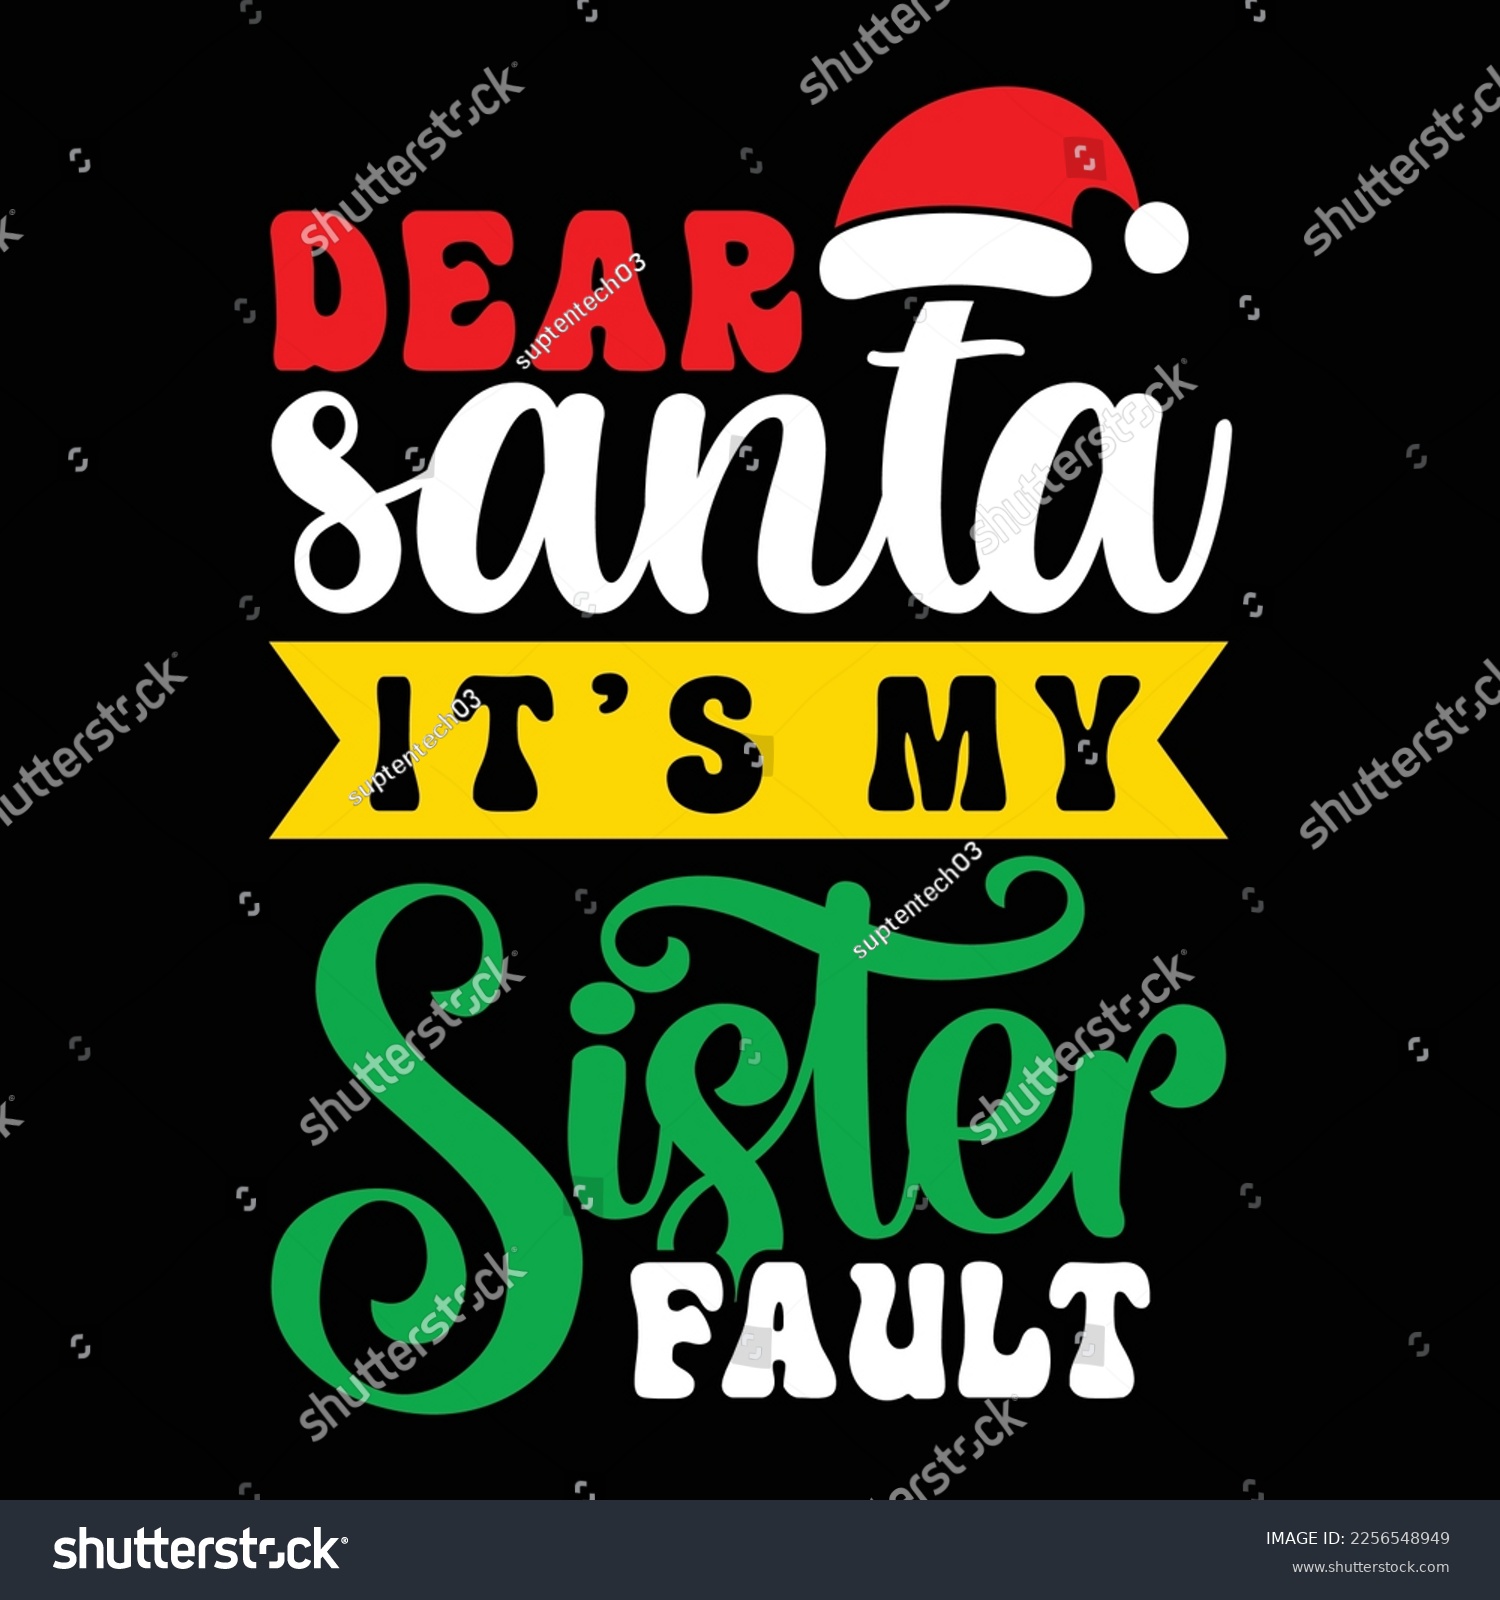 SVG of Dear Santa It's My Sister Fault, Merry Christmas shirts Print Template, Xmas Ugly Snow Santa Clouse New Year Holiday Candy Santa Hat vector illustration for Christmas hand lettered svg